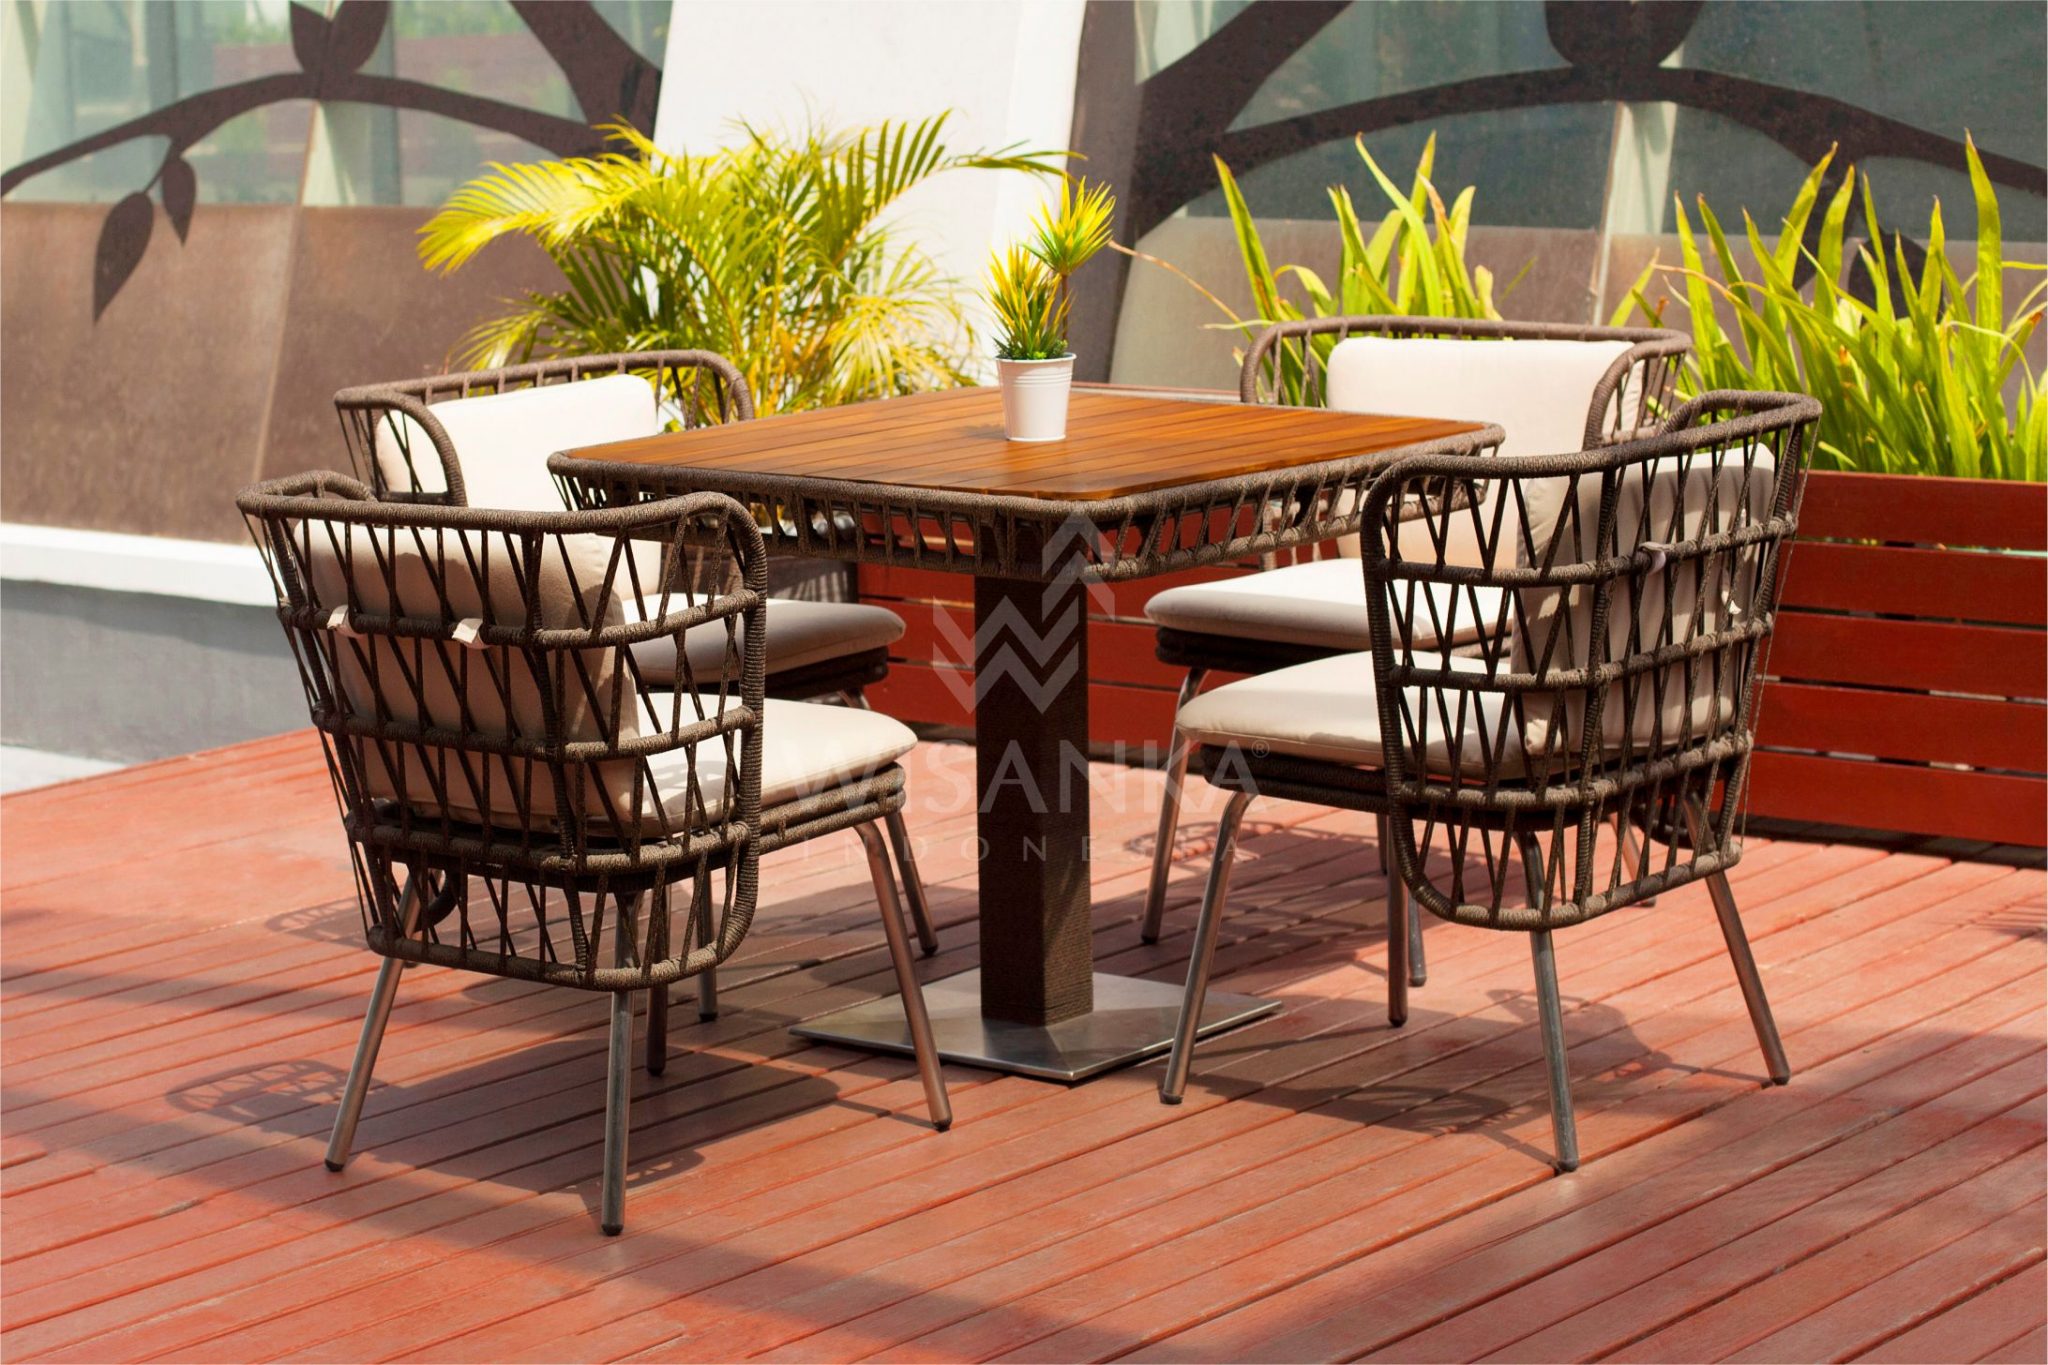 Zamira Outdoor Rattan Dining Set Synthetic Rattan Furniture Indonesia